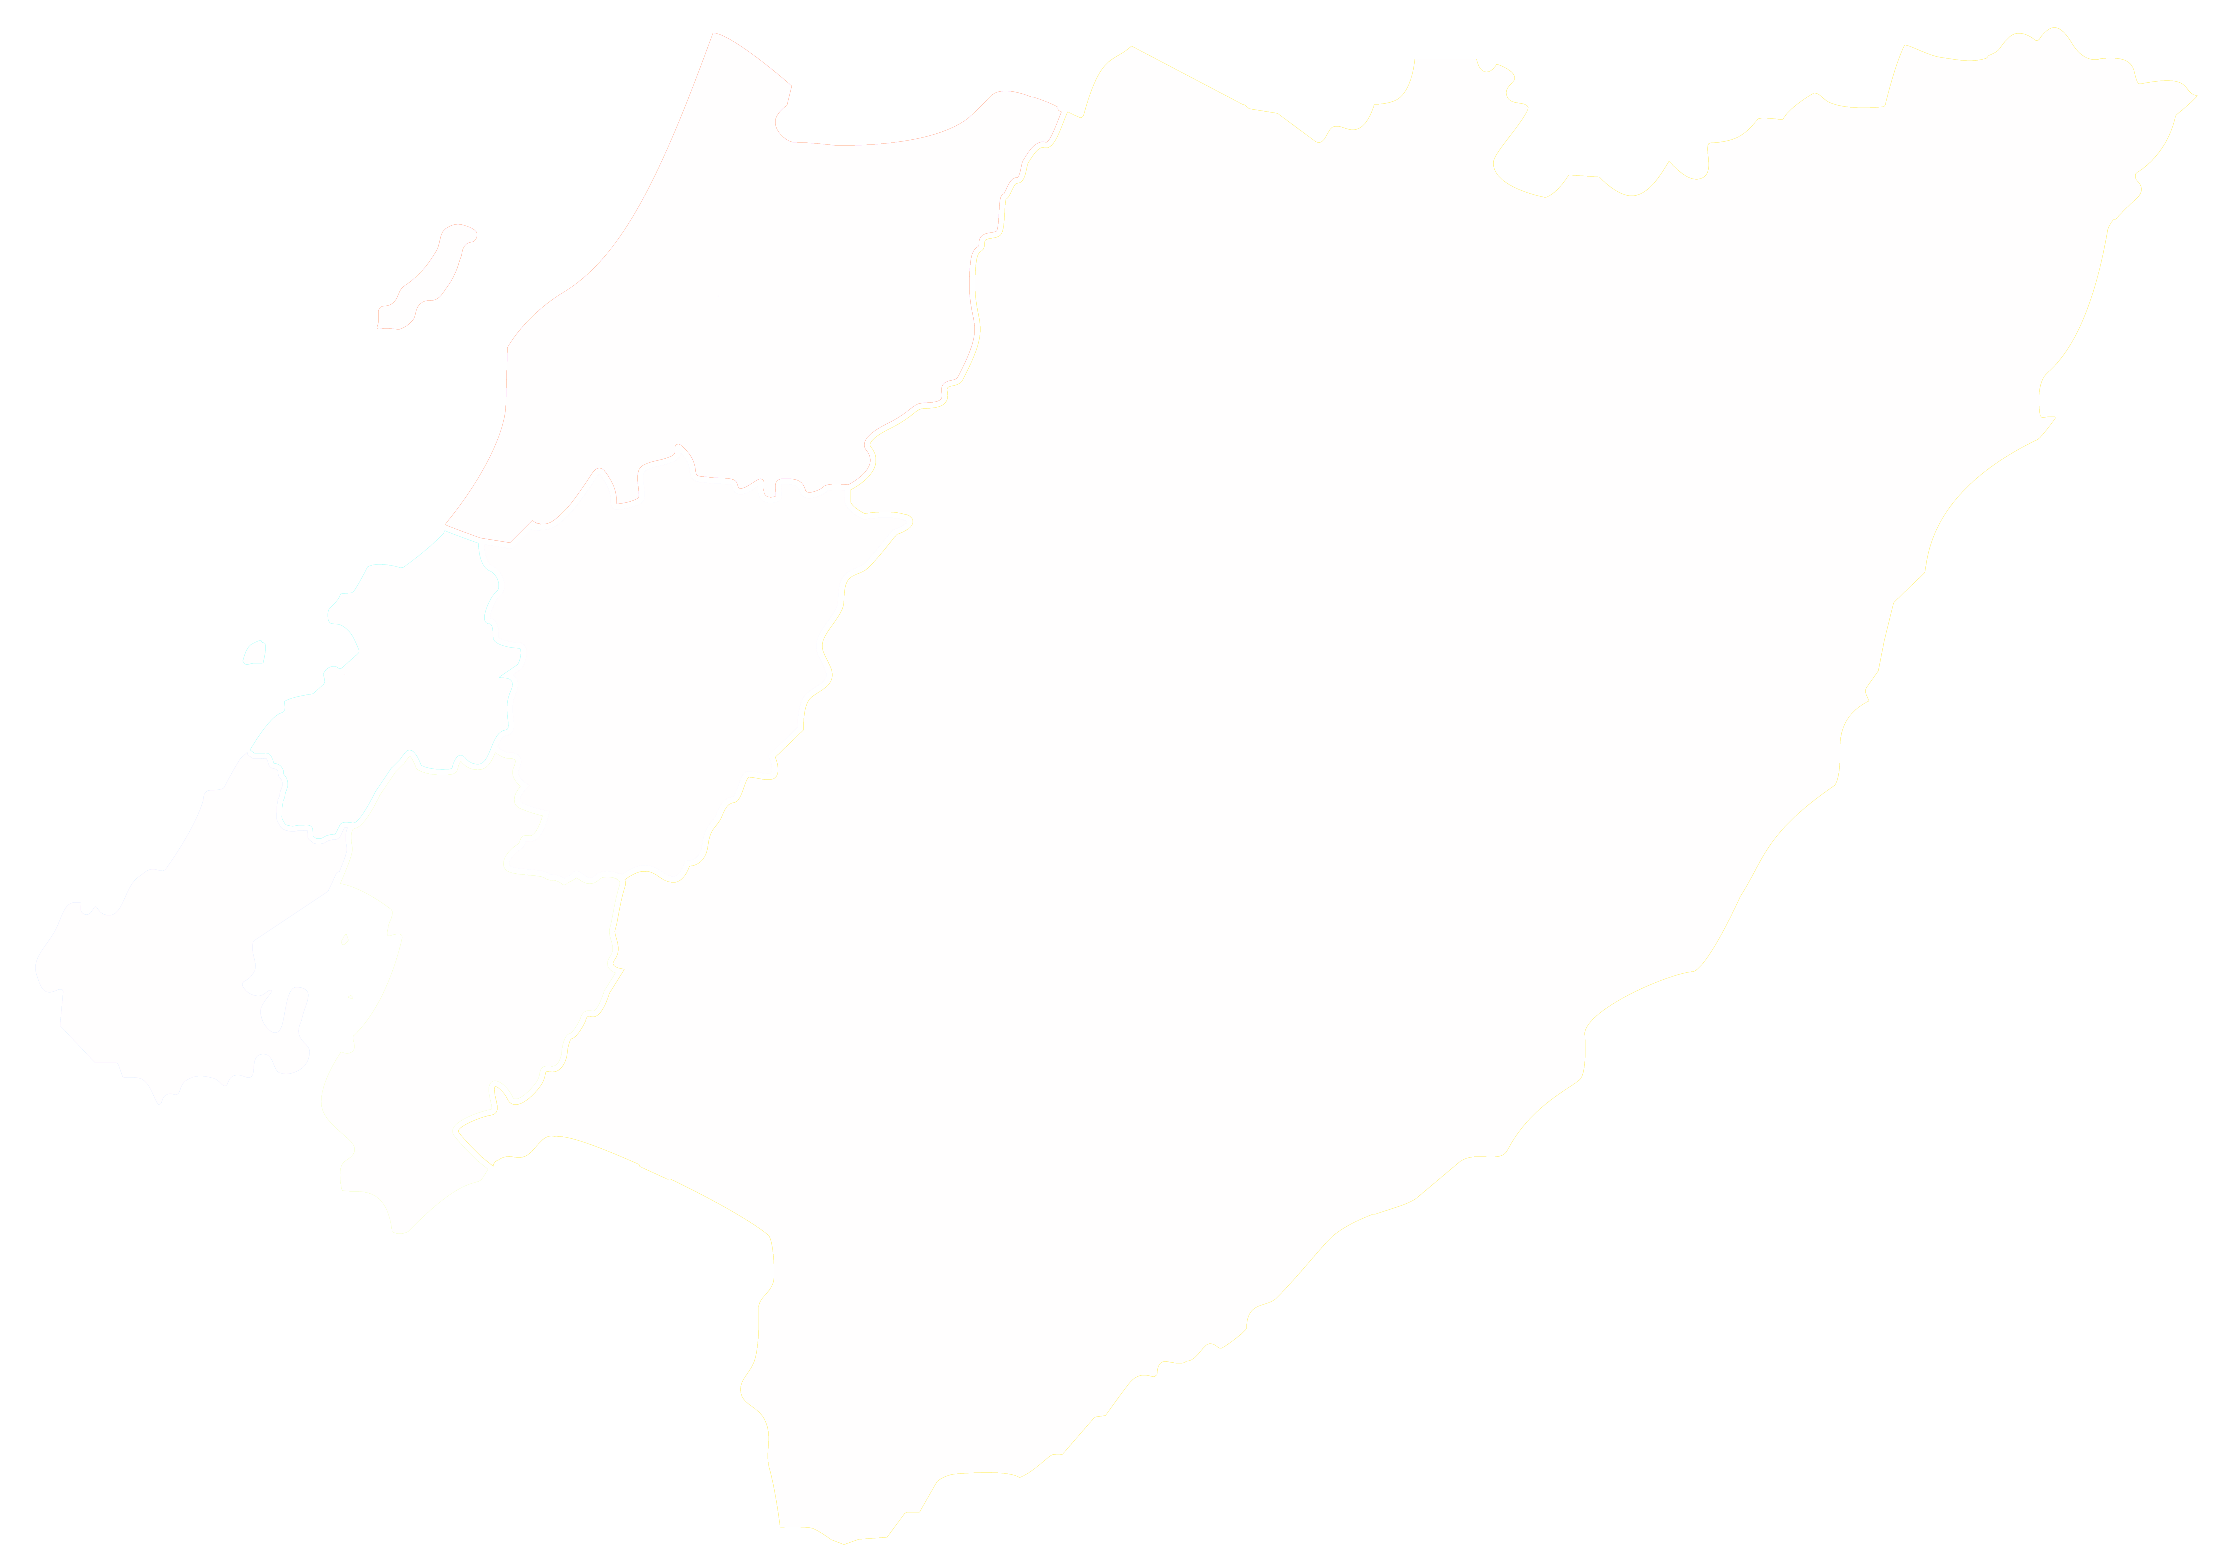 white transparent outline of wellington region and local boundaries - depicting coverage